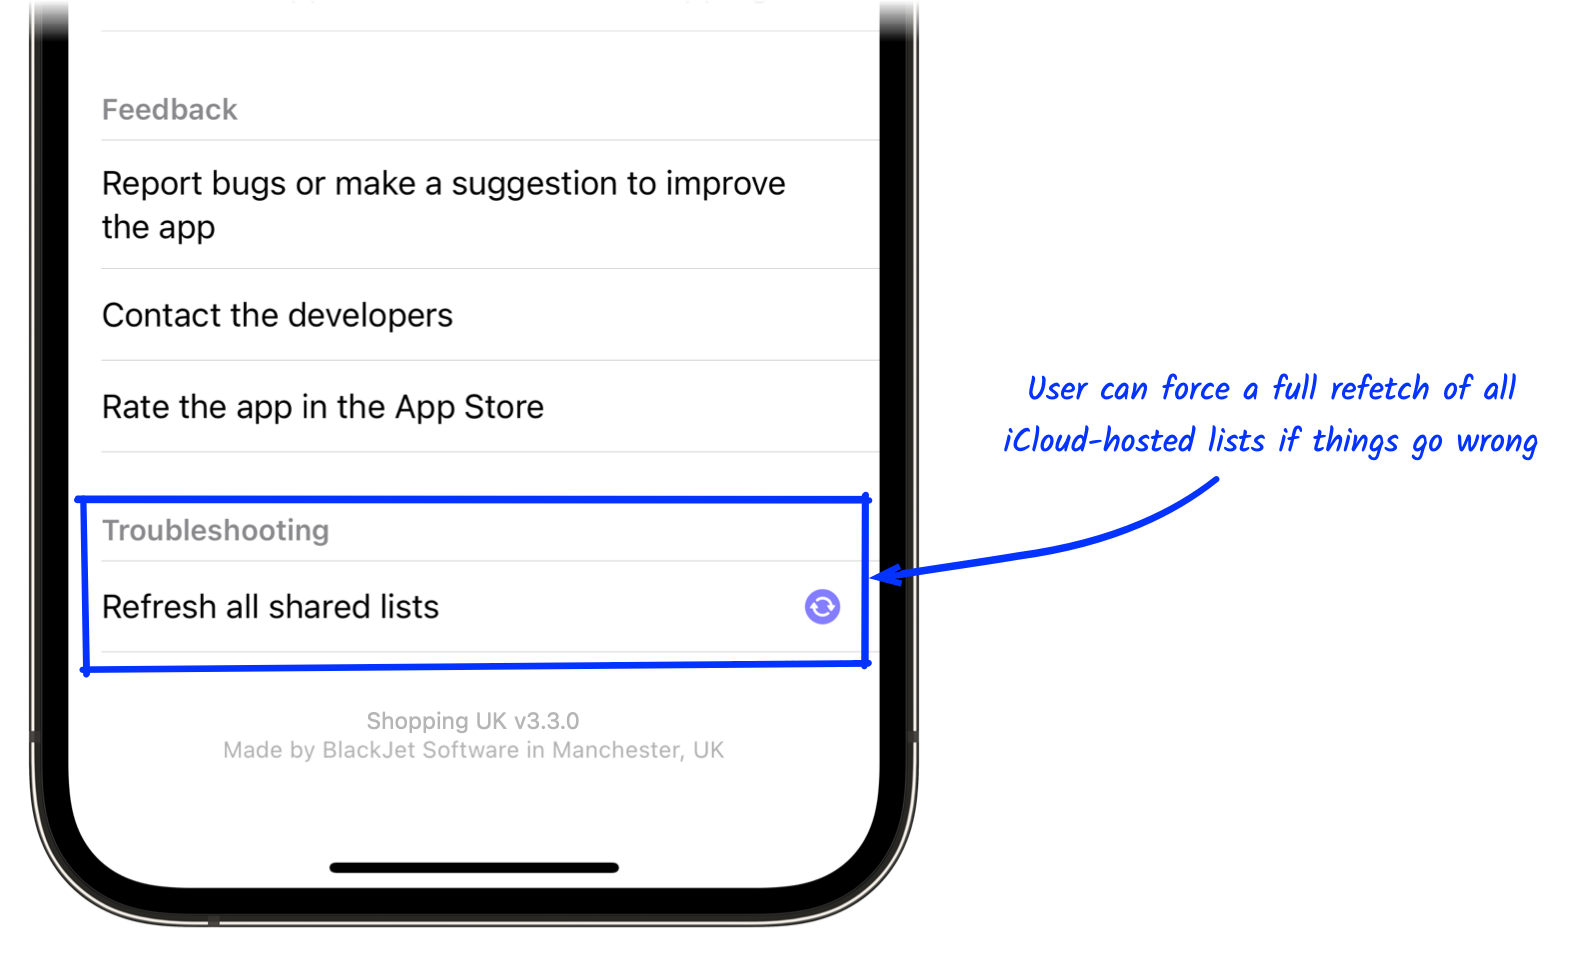 Troubleshooting option to force a refetch of all iCloud-hosted lists